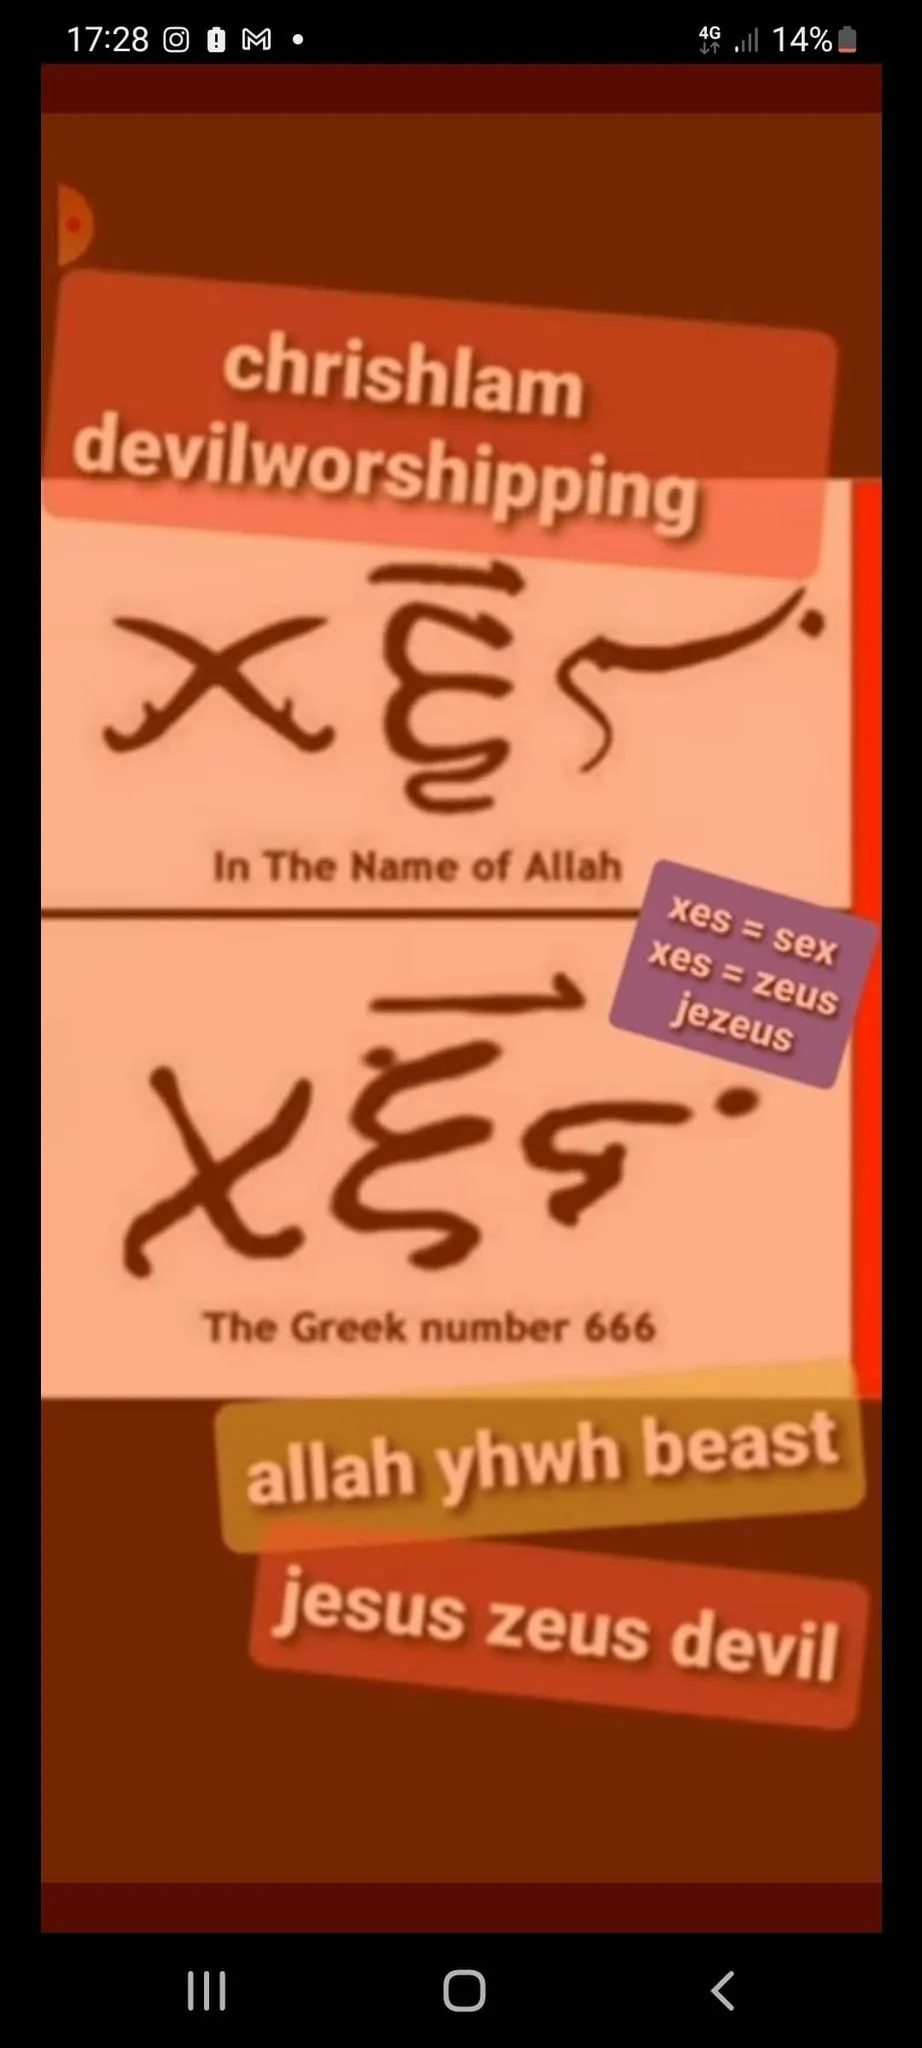 Muslim devil worshipping in the heart of Allah screenshot showing the Biblical Mark of the Beast from Revelation 13:18